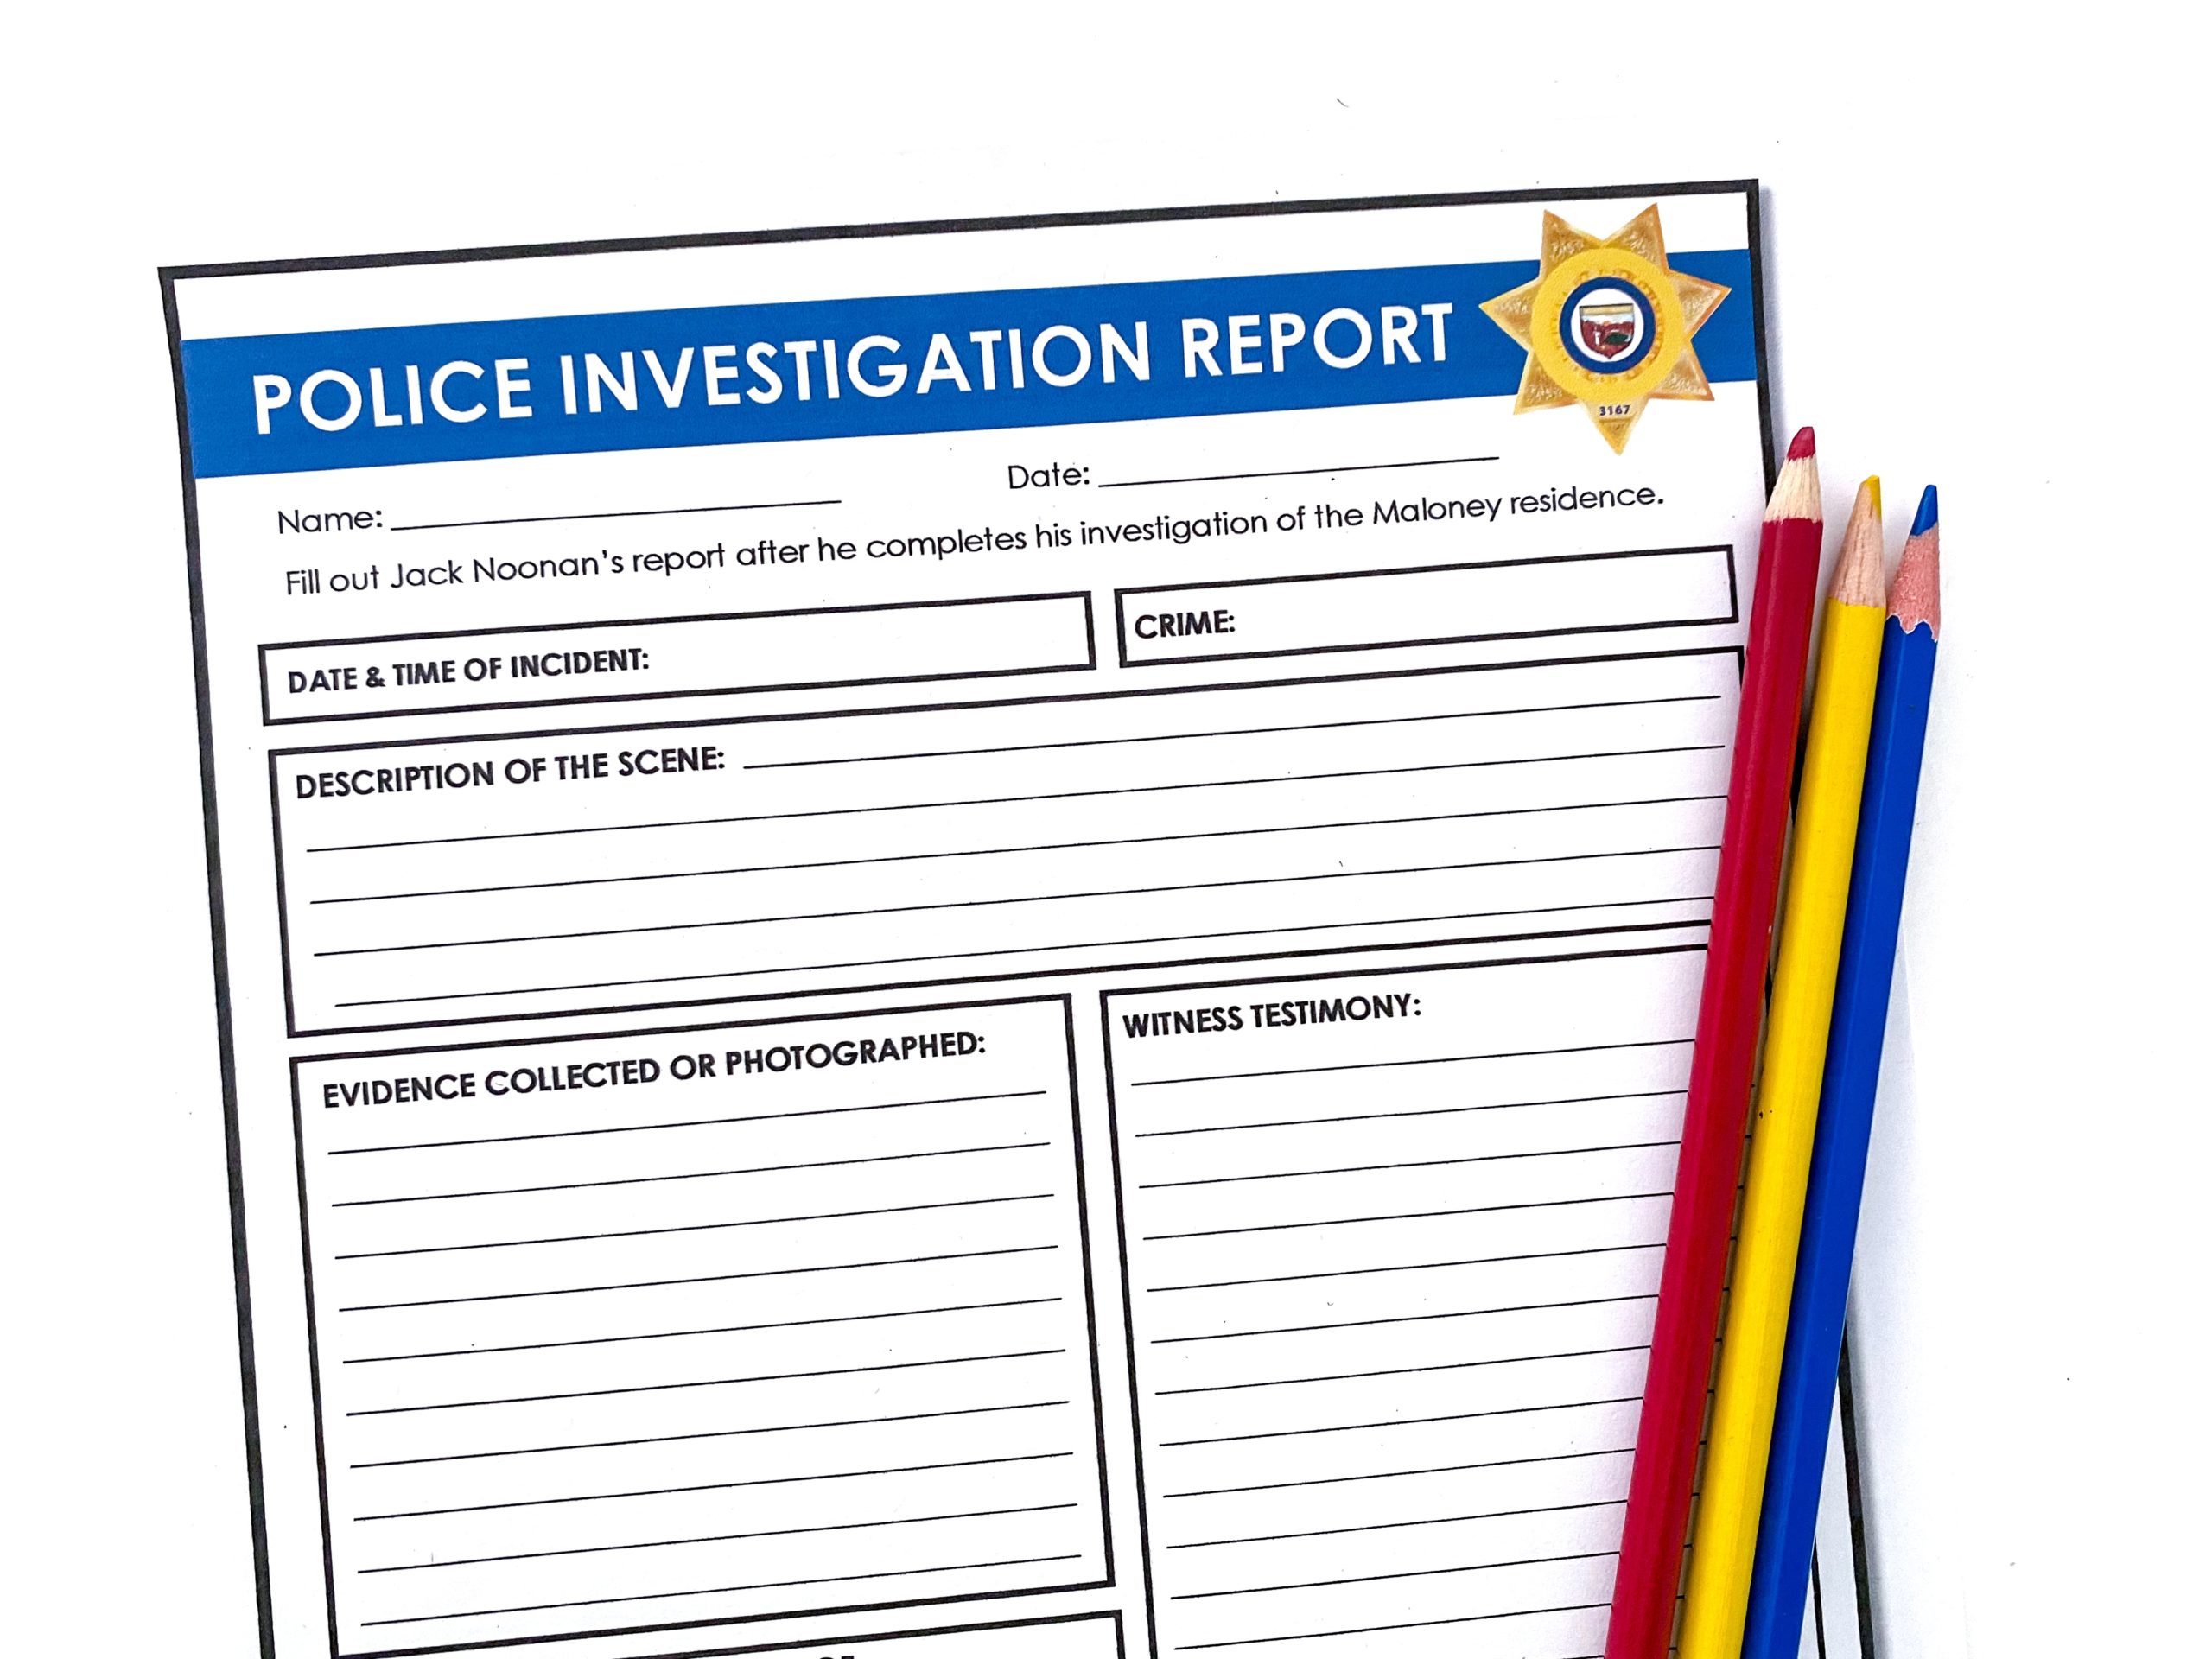 Police Investigation Report Assignment